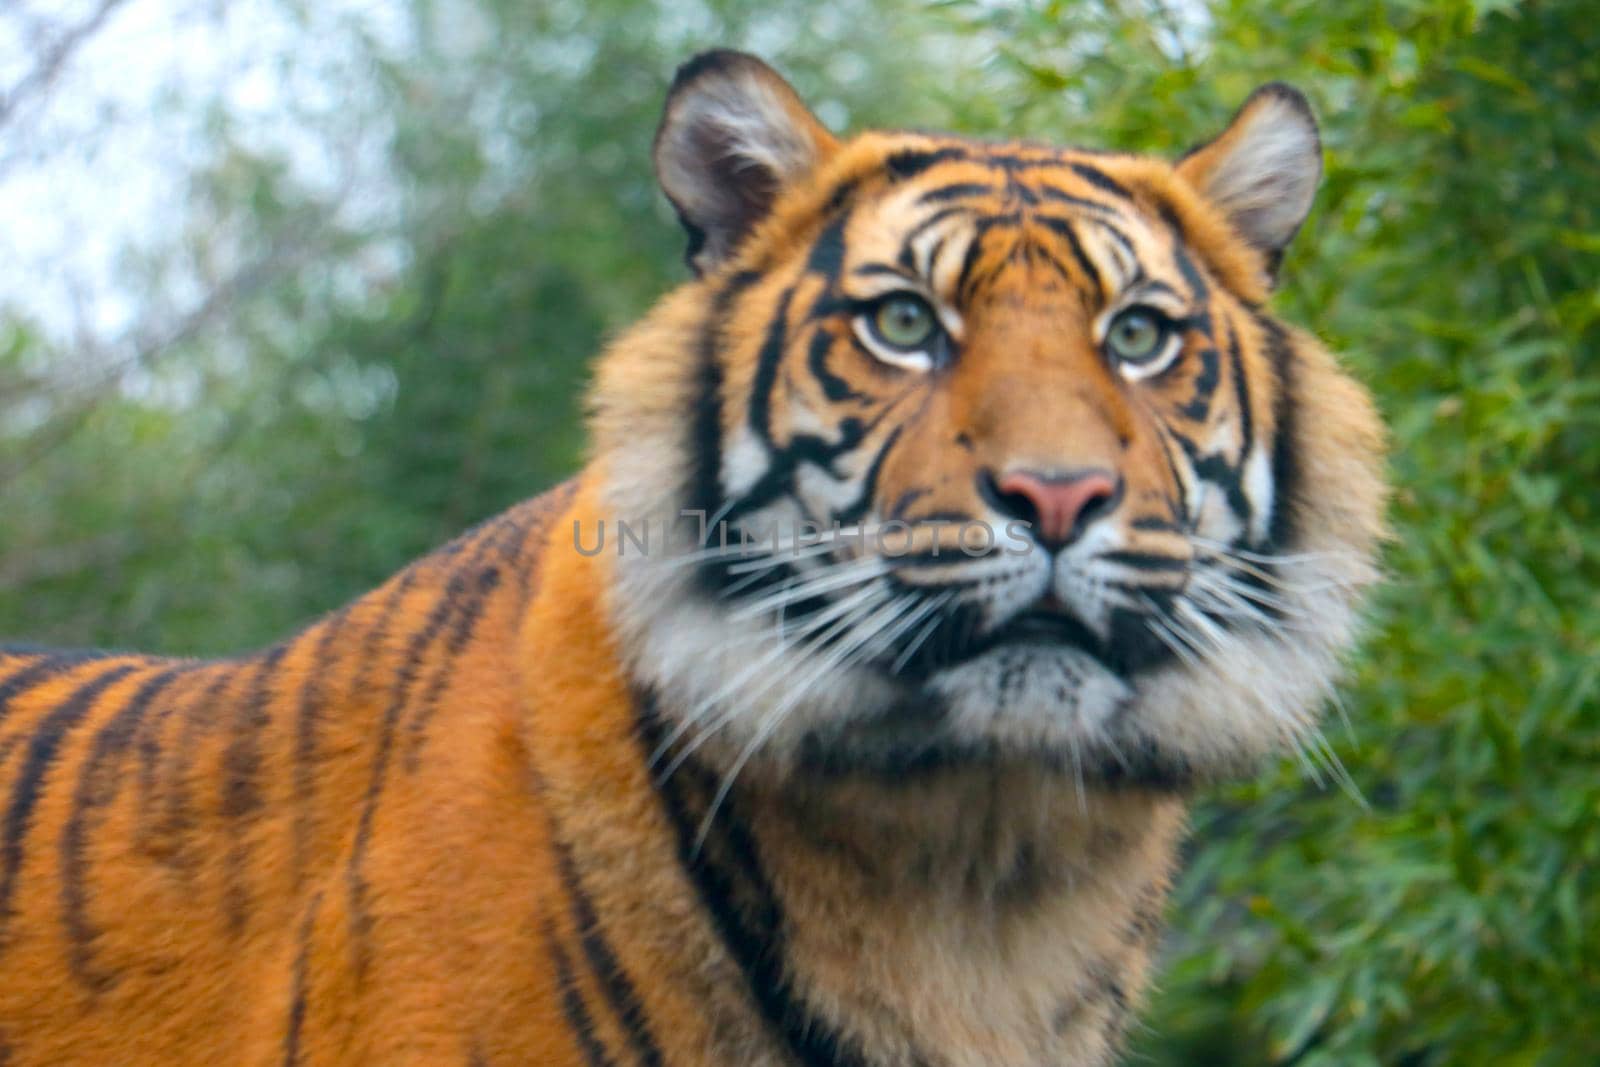 Out of focus, blurry background, beautiful tiger in the park